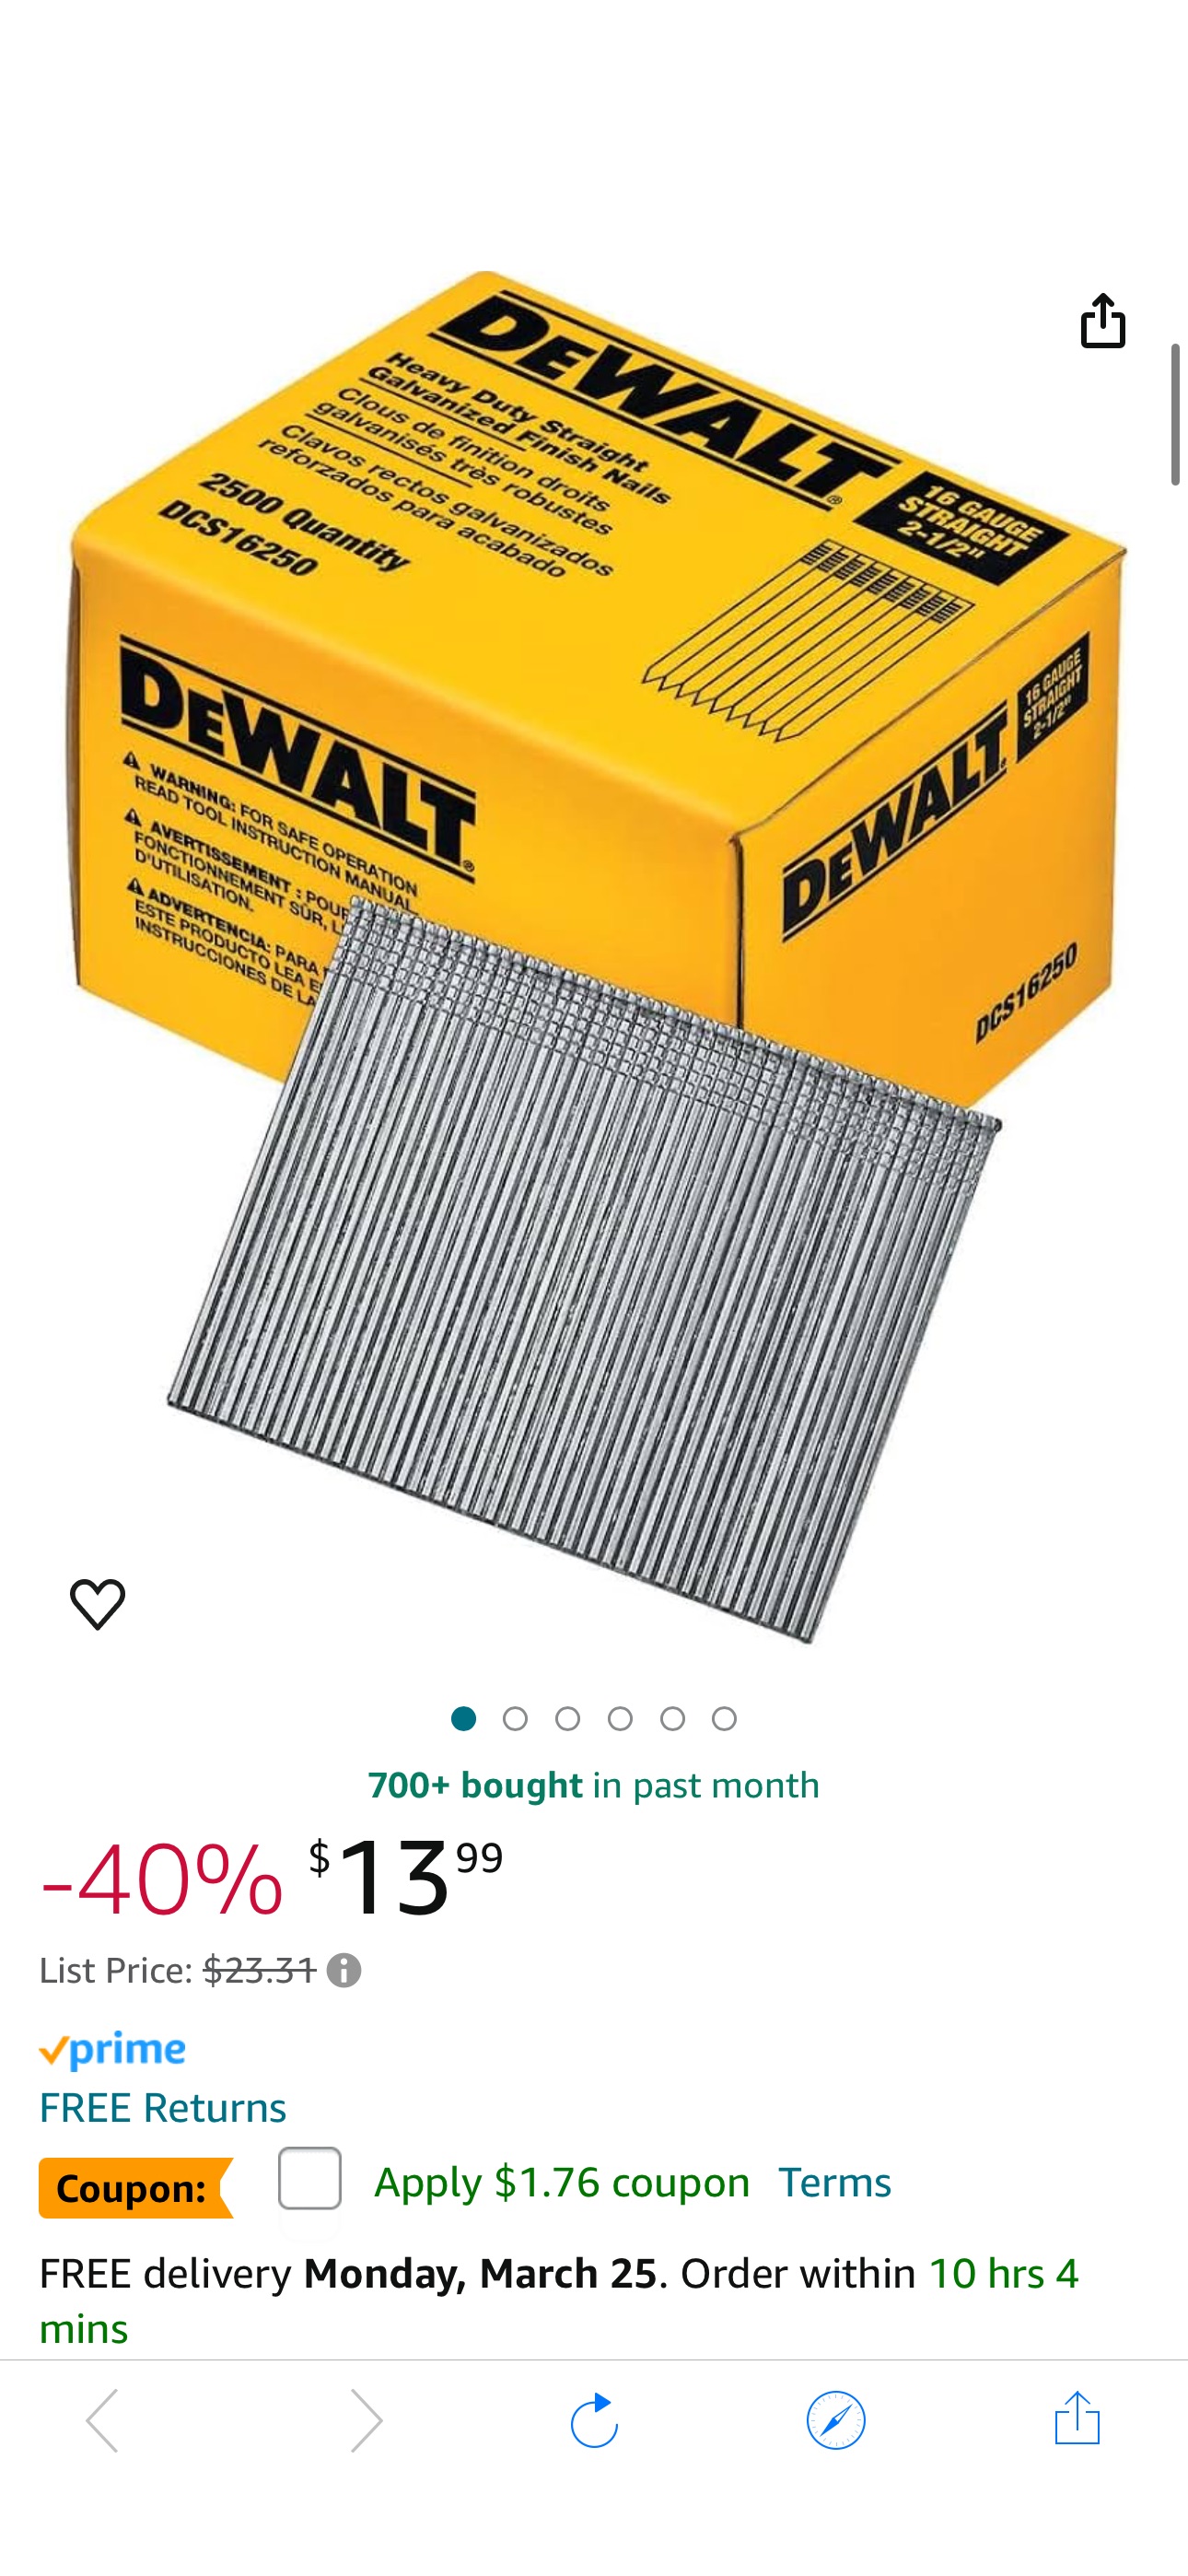 DEWALT Finish Nails, 2-1/2-Inch, 16GA, 2500 Count (Pack of 1)(DCS16250) - Collated Finish Nails - Amazon.com coupon